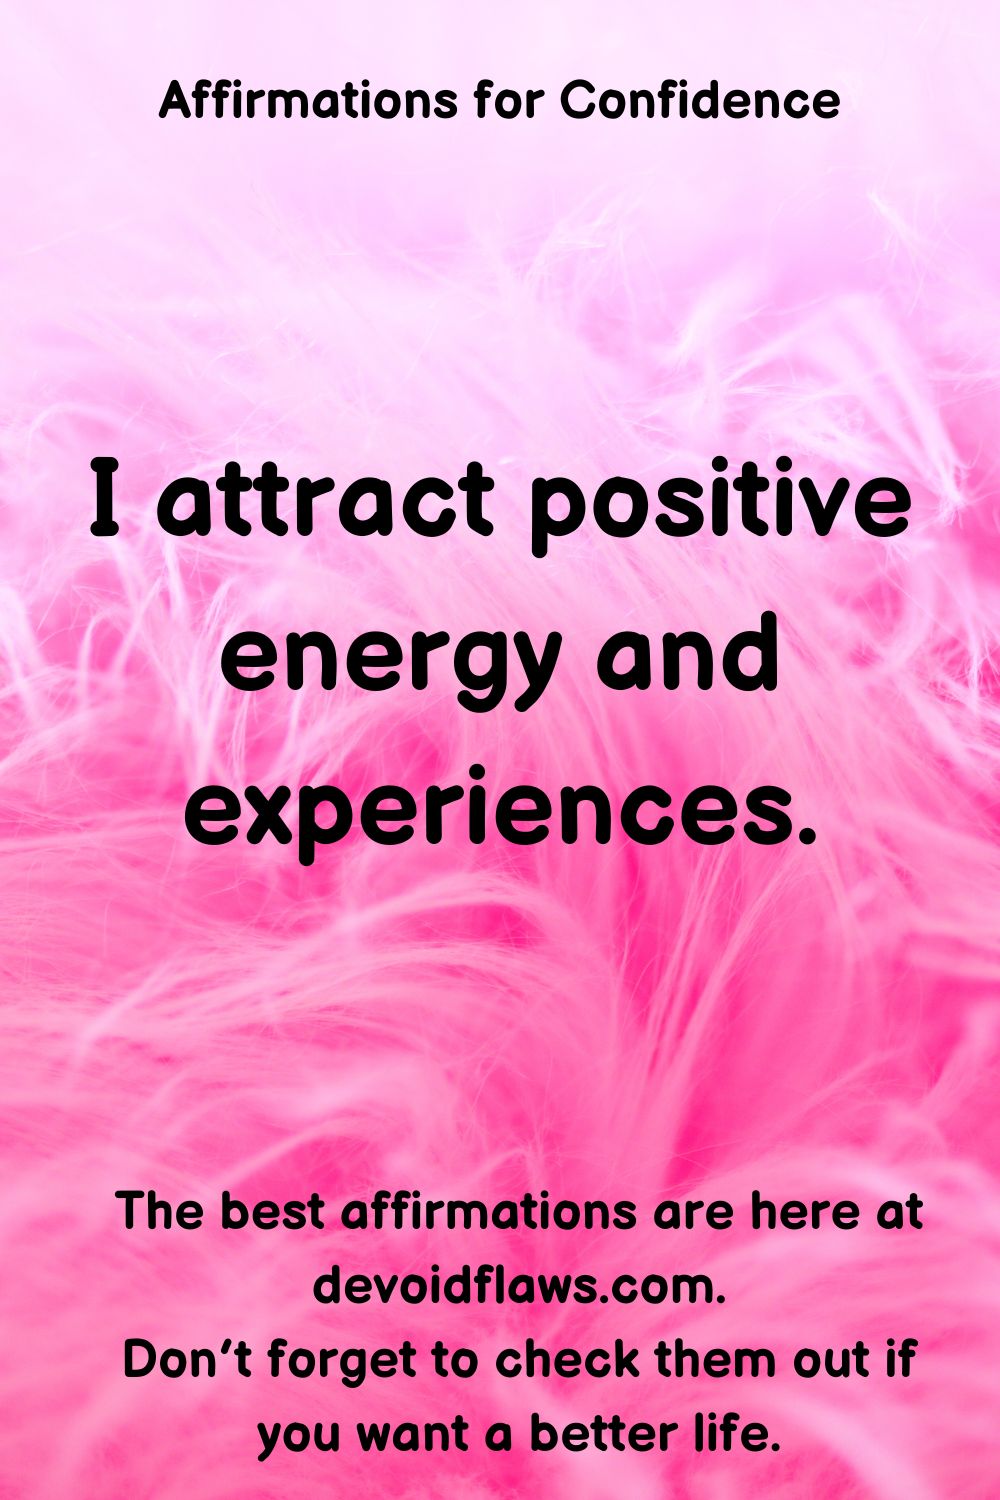 100 Daily Affirmations for Confidence